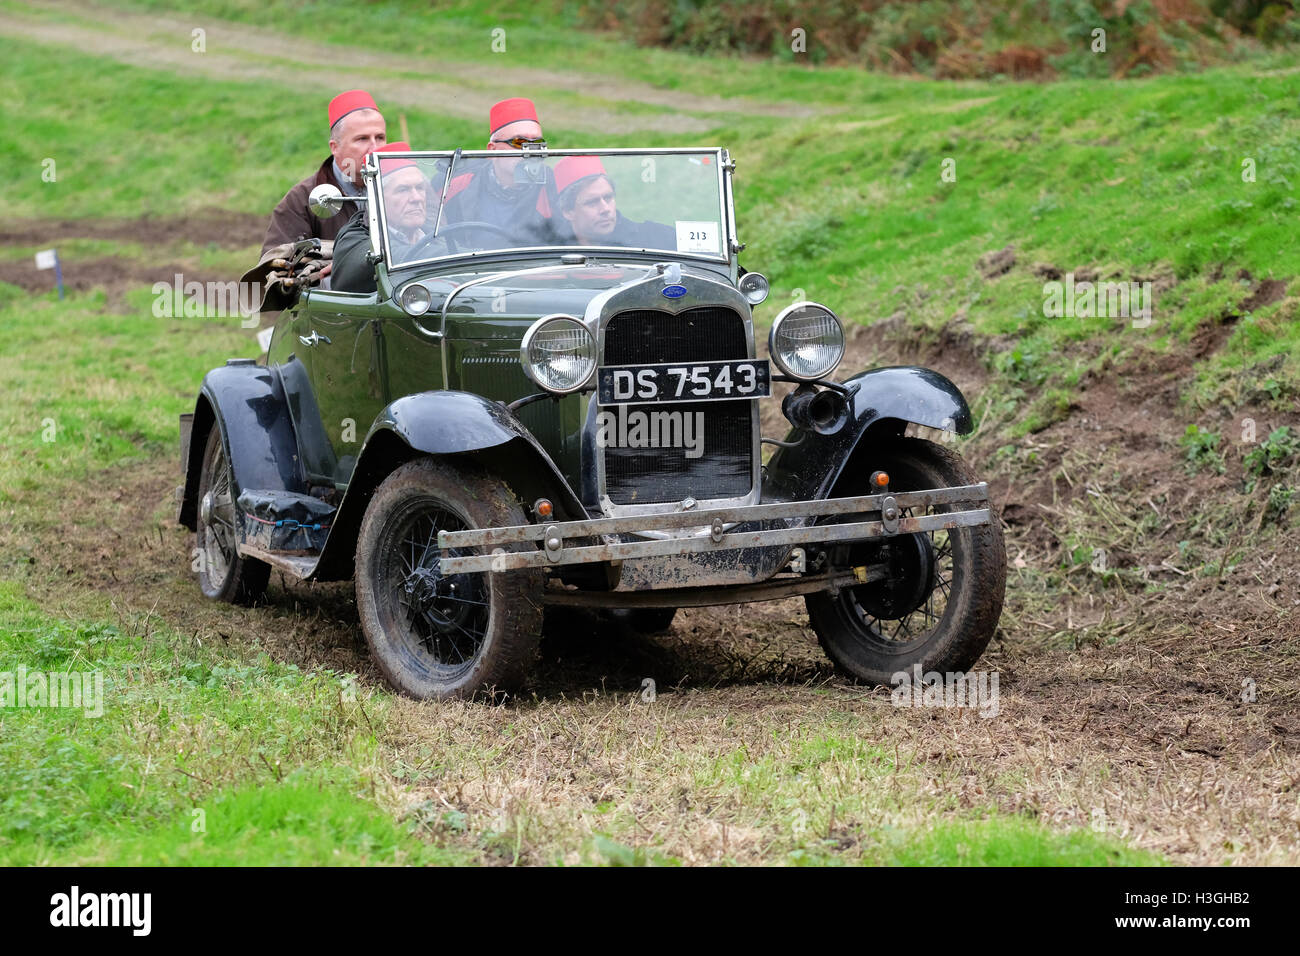 Badlands Farm, Kinnerton, Powys, Wales, UK - Saturday 8th October 2016 - Competitors in a 1930 Ford Model A take part in the Vintage Sports-Car Club ( VSCC ) hill climb at Badlands a long muddy track and hillside climb in Powys. Competitors earn points not for speed or time but how far up the hill they manage to drive their vintage sports car. Stock Photo